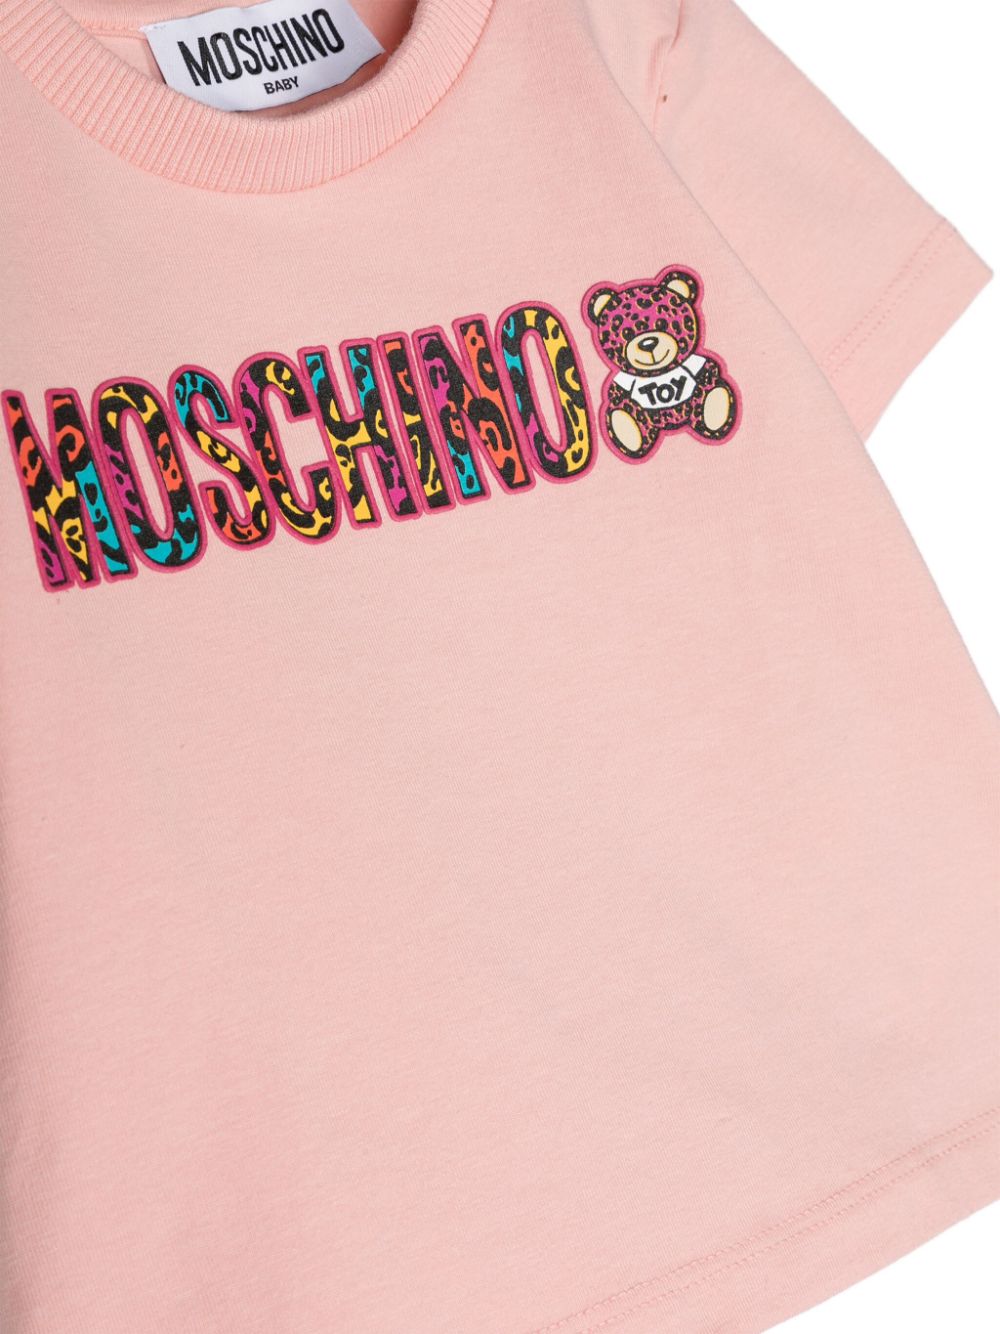 Moschino Rose with Leopard Logo Tee Shirt